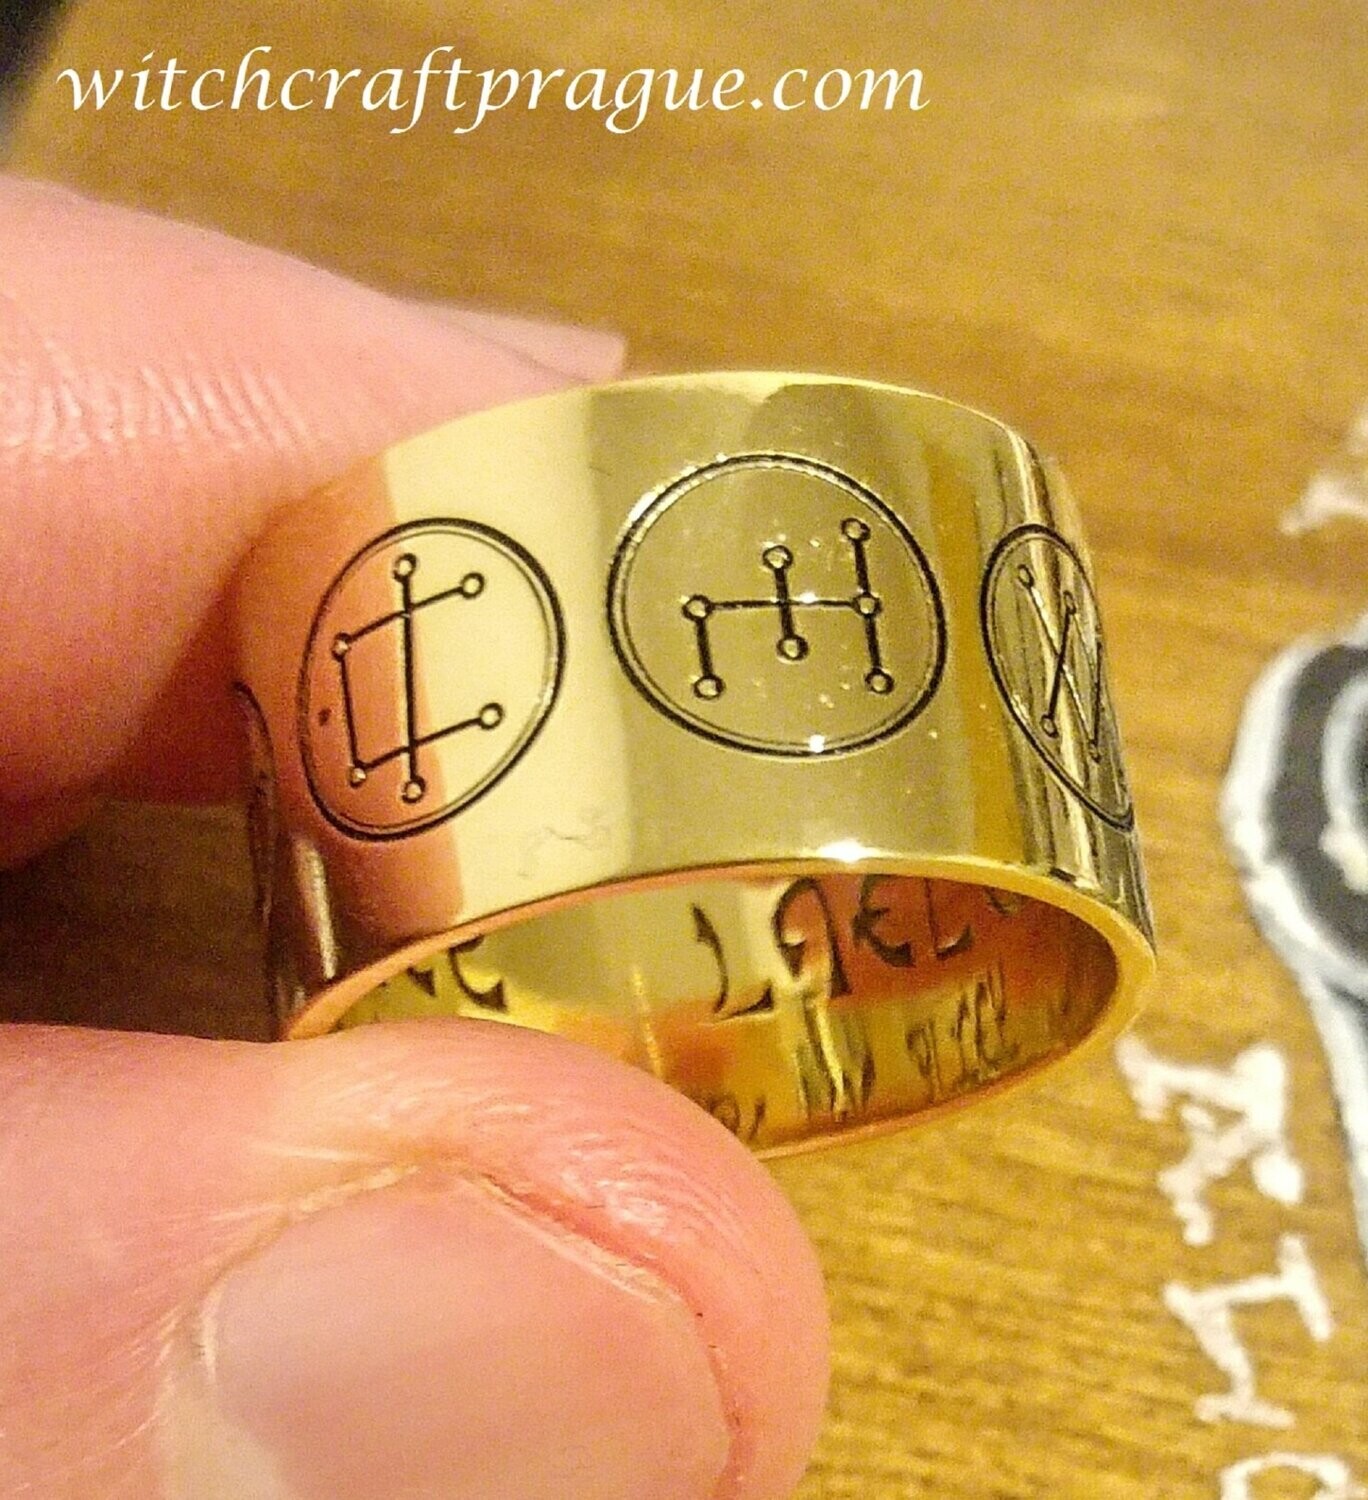 Witchcraft Archangels blessing and protection ring